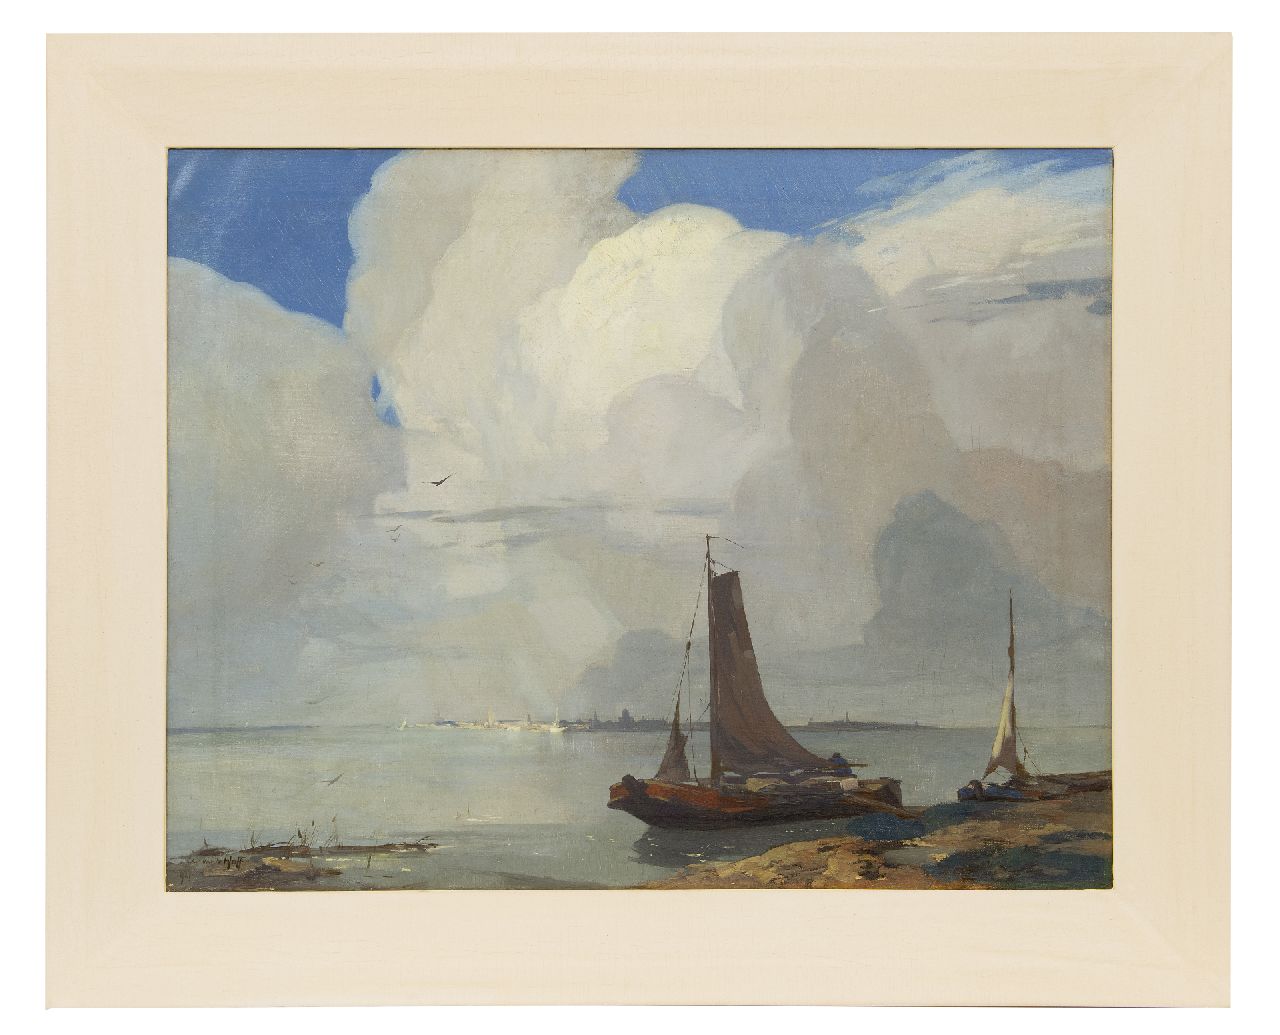 Hoff A.J. van 't | Adrianus Johannes 'Adriaan' van 't Hoff | Paintings offered for sale | Fishing boats on the waterfront, a city in the distance, oil on canvas 60.2 x 75.5 cm, signed l.l. and dated 1927